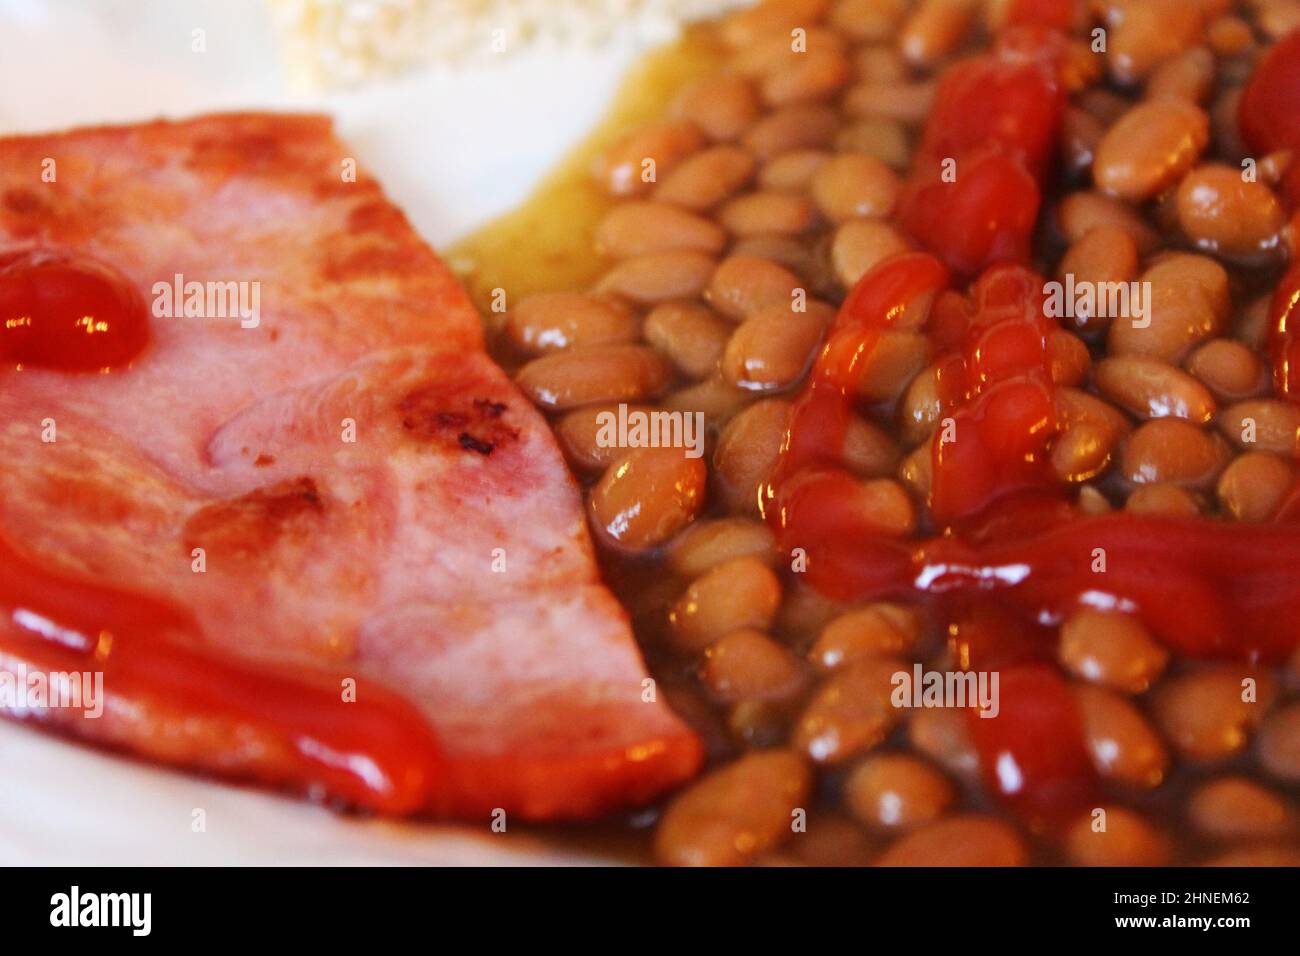 Close-up of a plate of baked beans, with fried ham, a slice of bread, and ketchup. Stock Photo